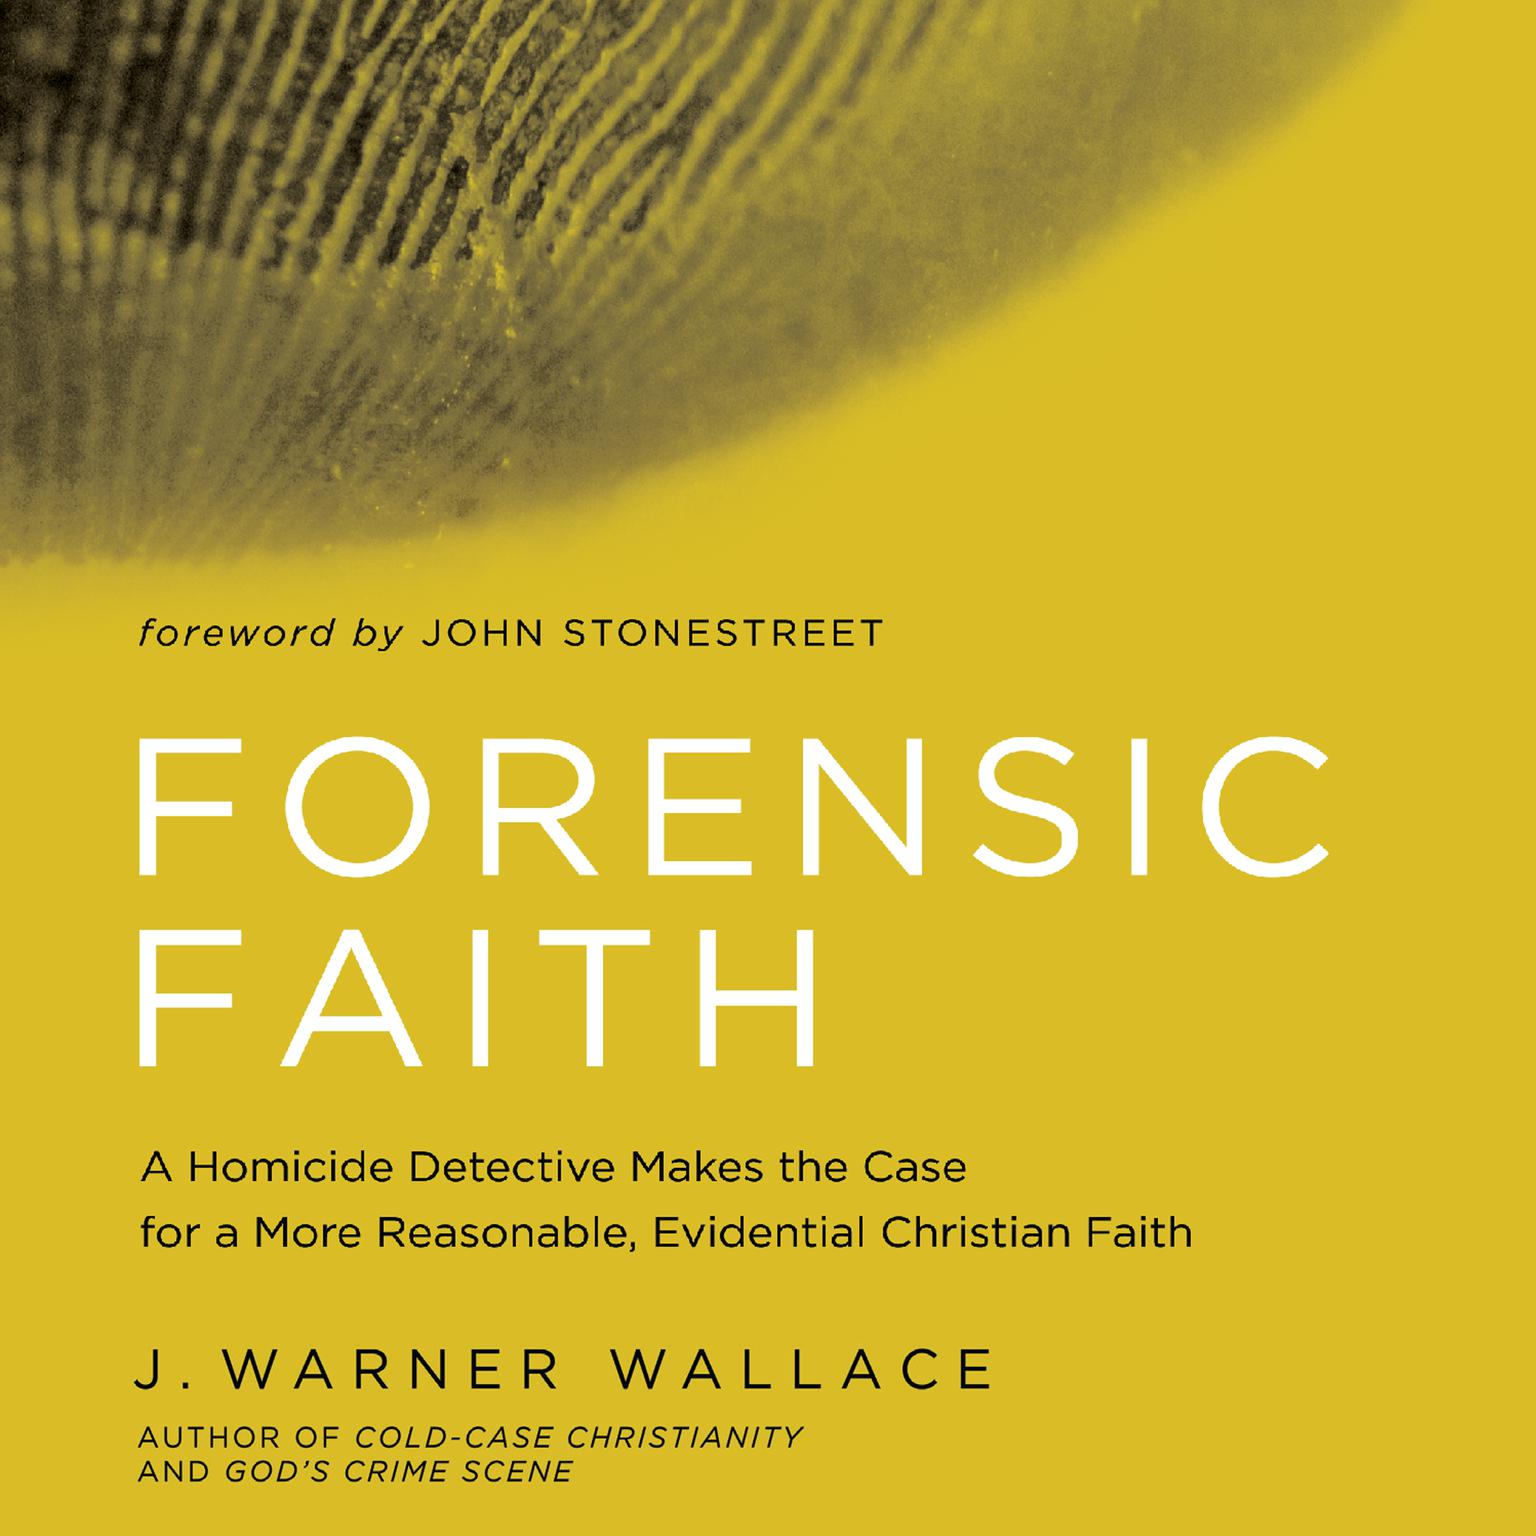 Forensic Faith: A Homicide Detective Makes the Case for a More Reasonable, Evidential Christian Faith Audiobook, by J. Warner Wallace